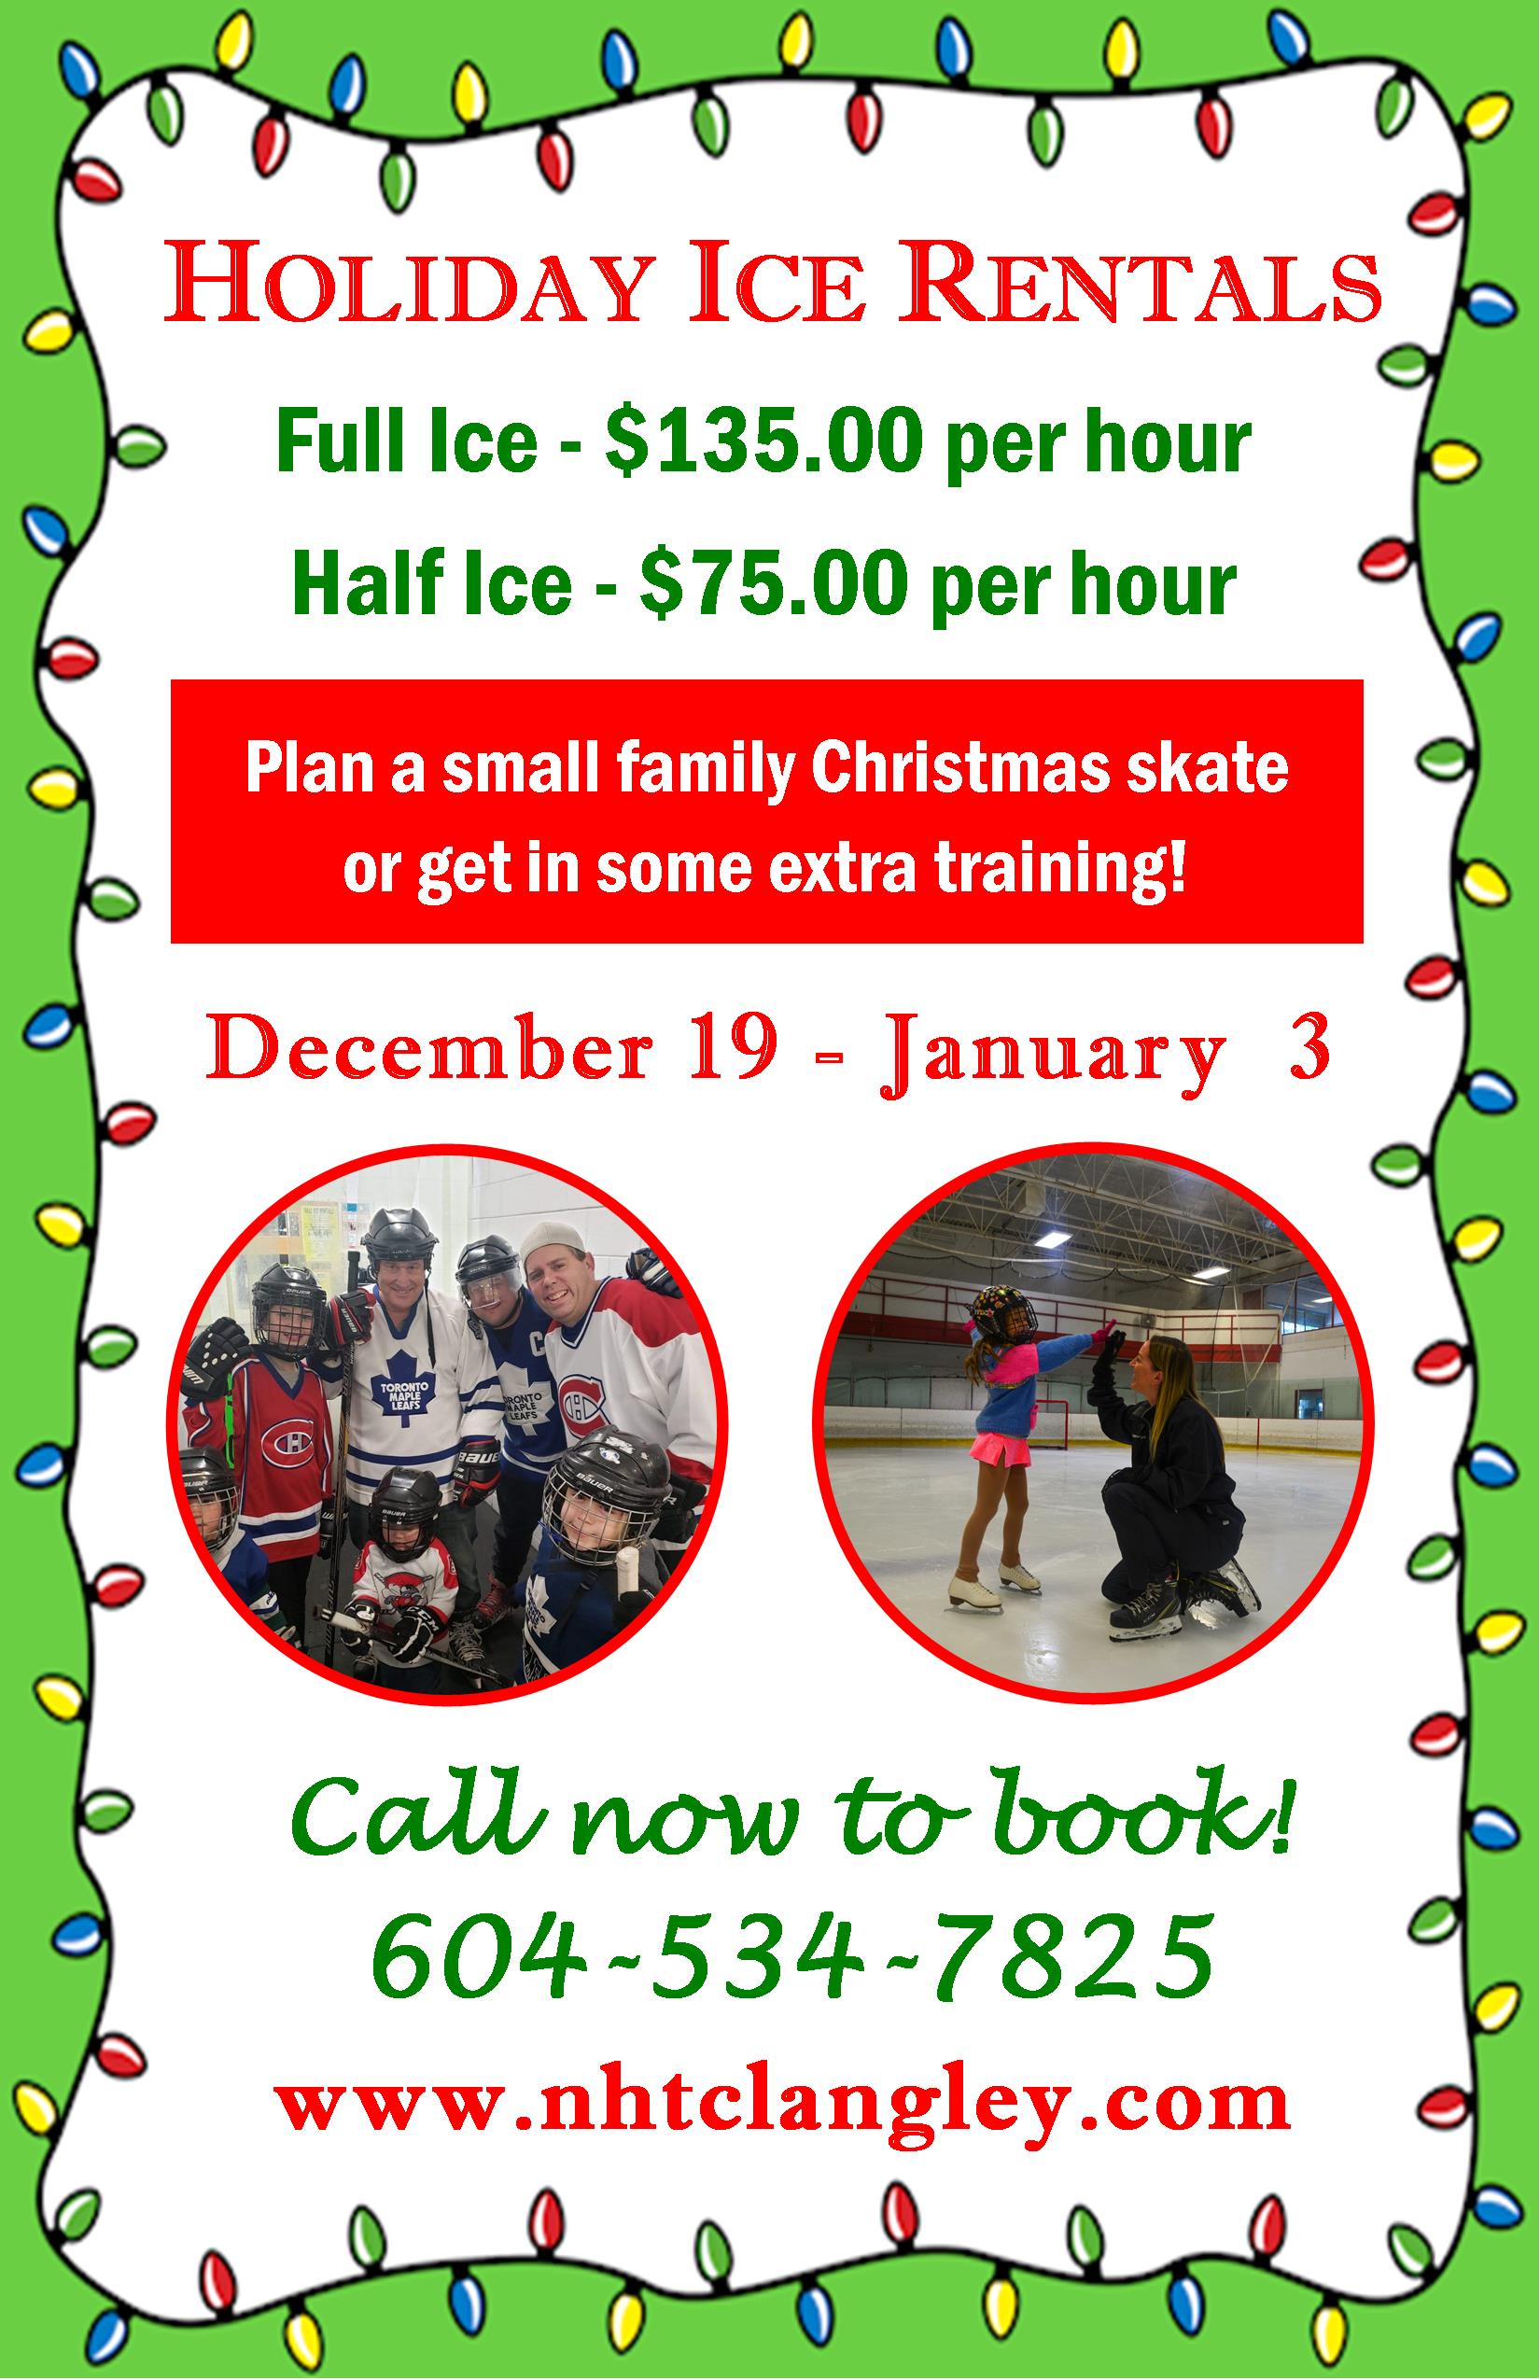 Ice Rentals in Langley: Creative Christmas & Festive Holiday Fun for Your Whole Family Bubble!